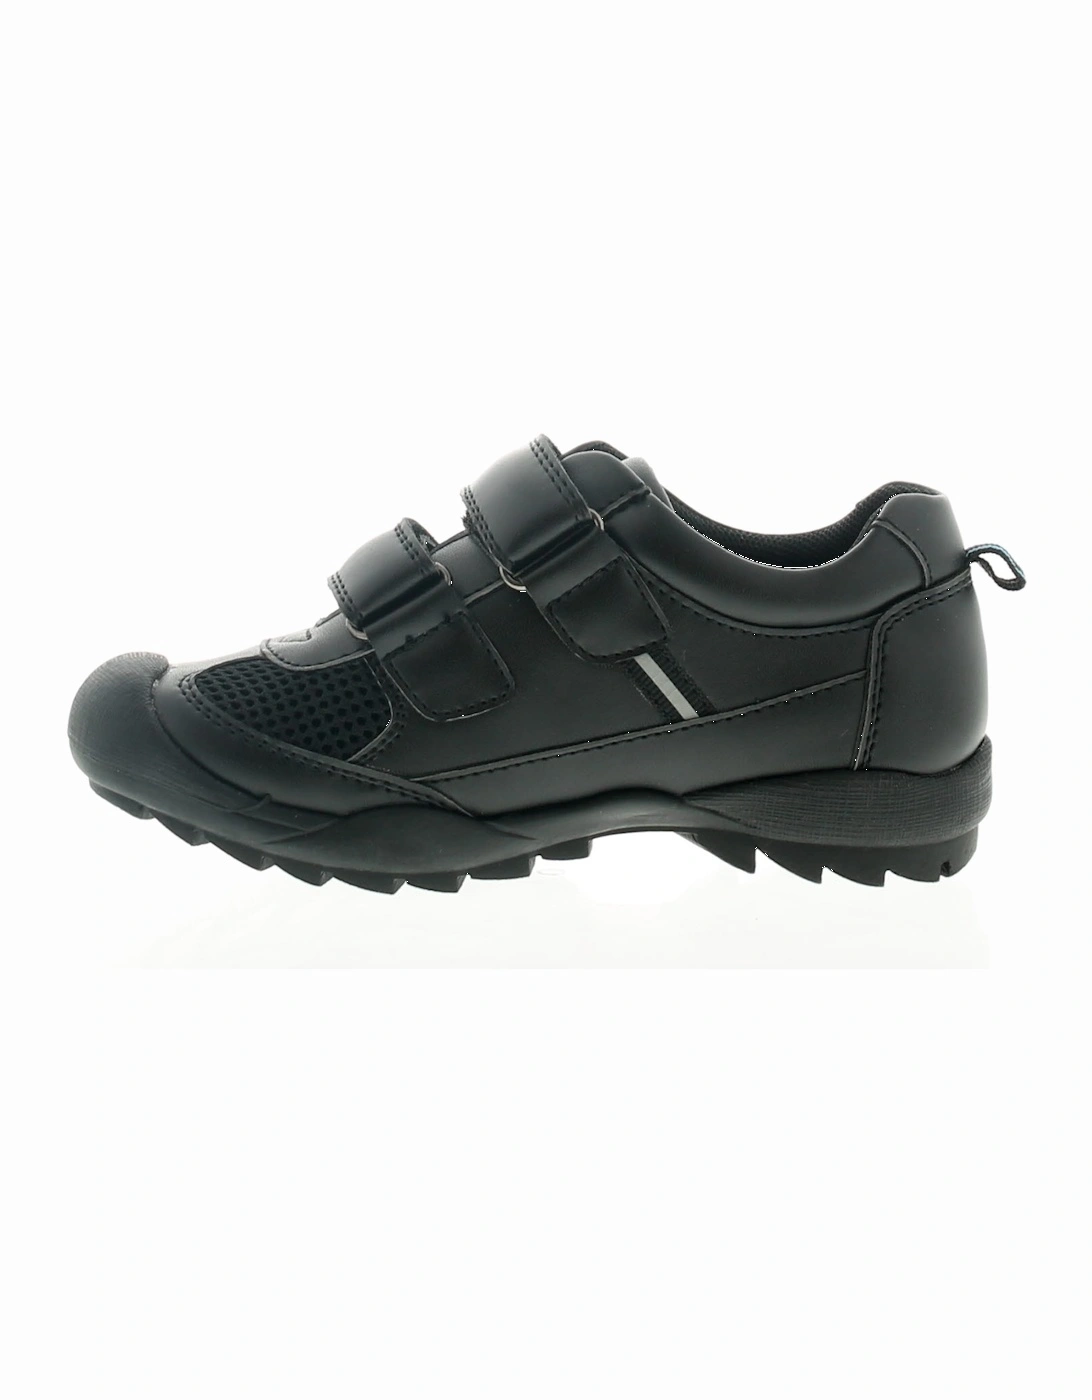 Younger Boys Shoes Trainers School Danny Touch Fastening black UK Size